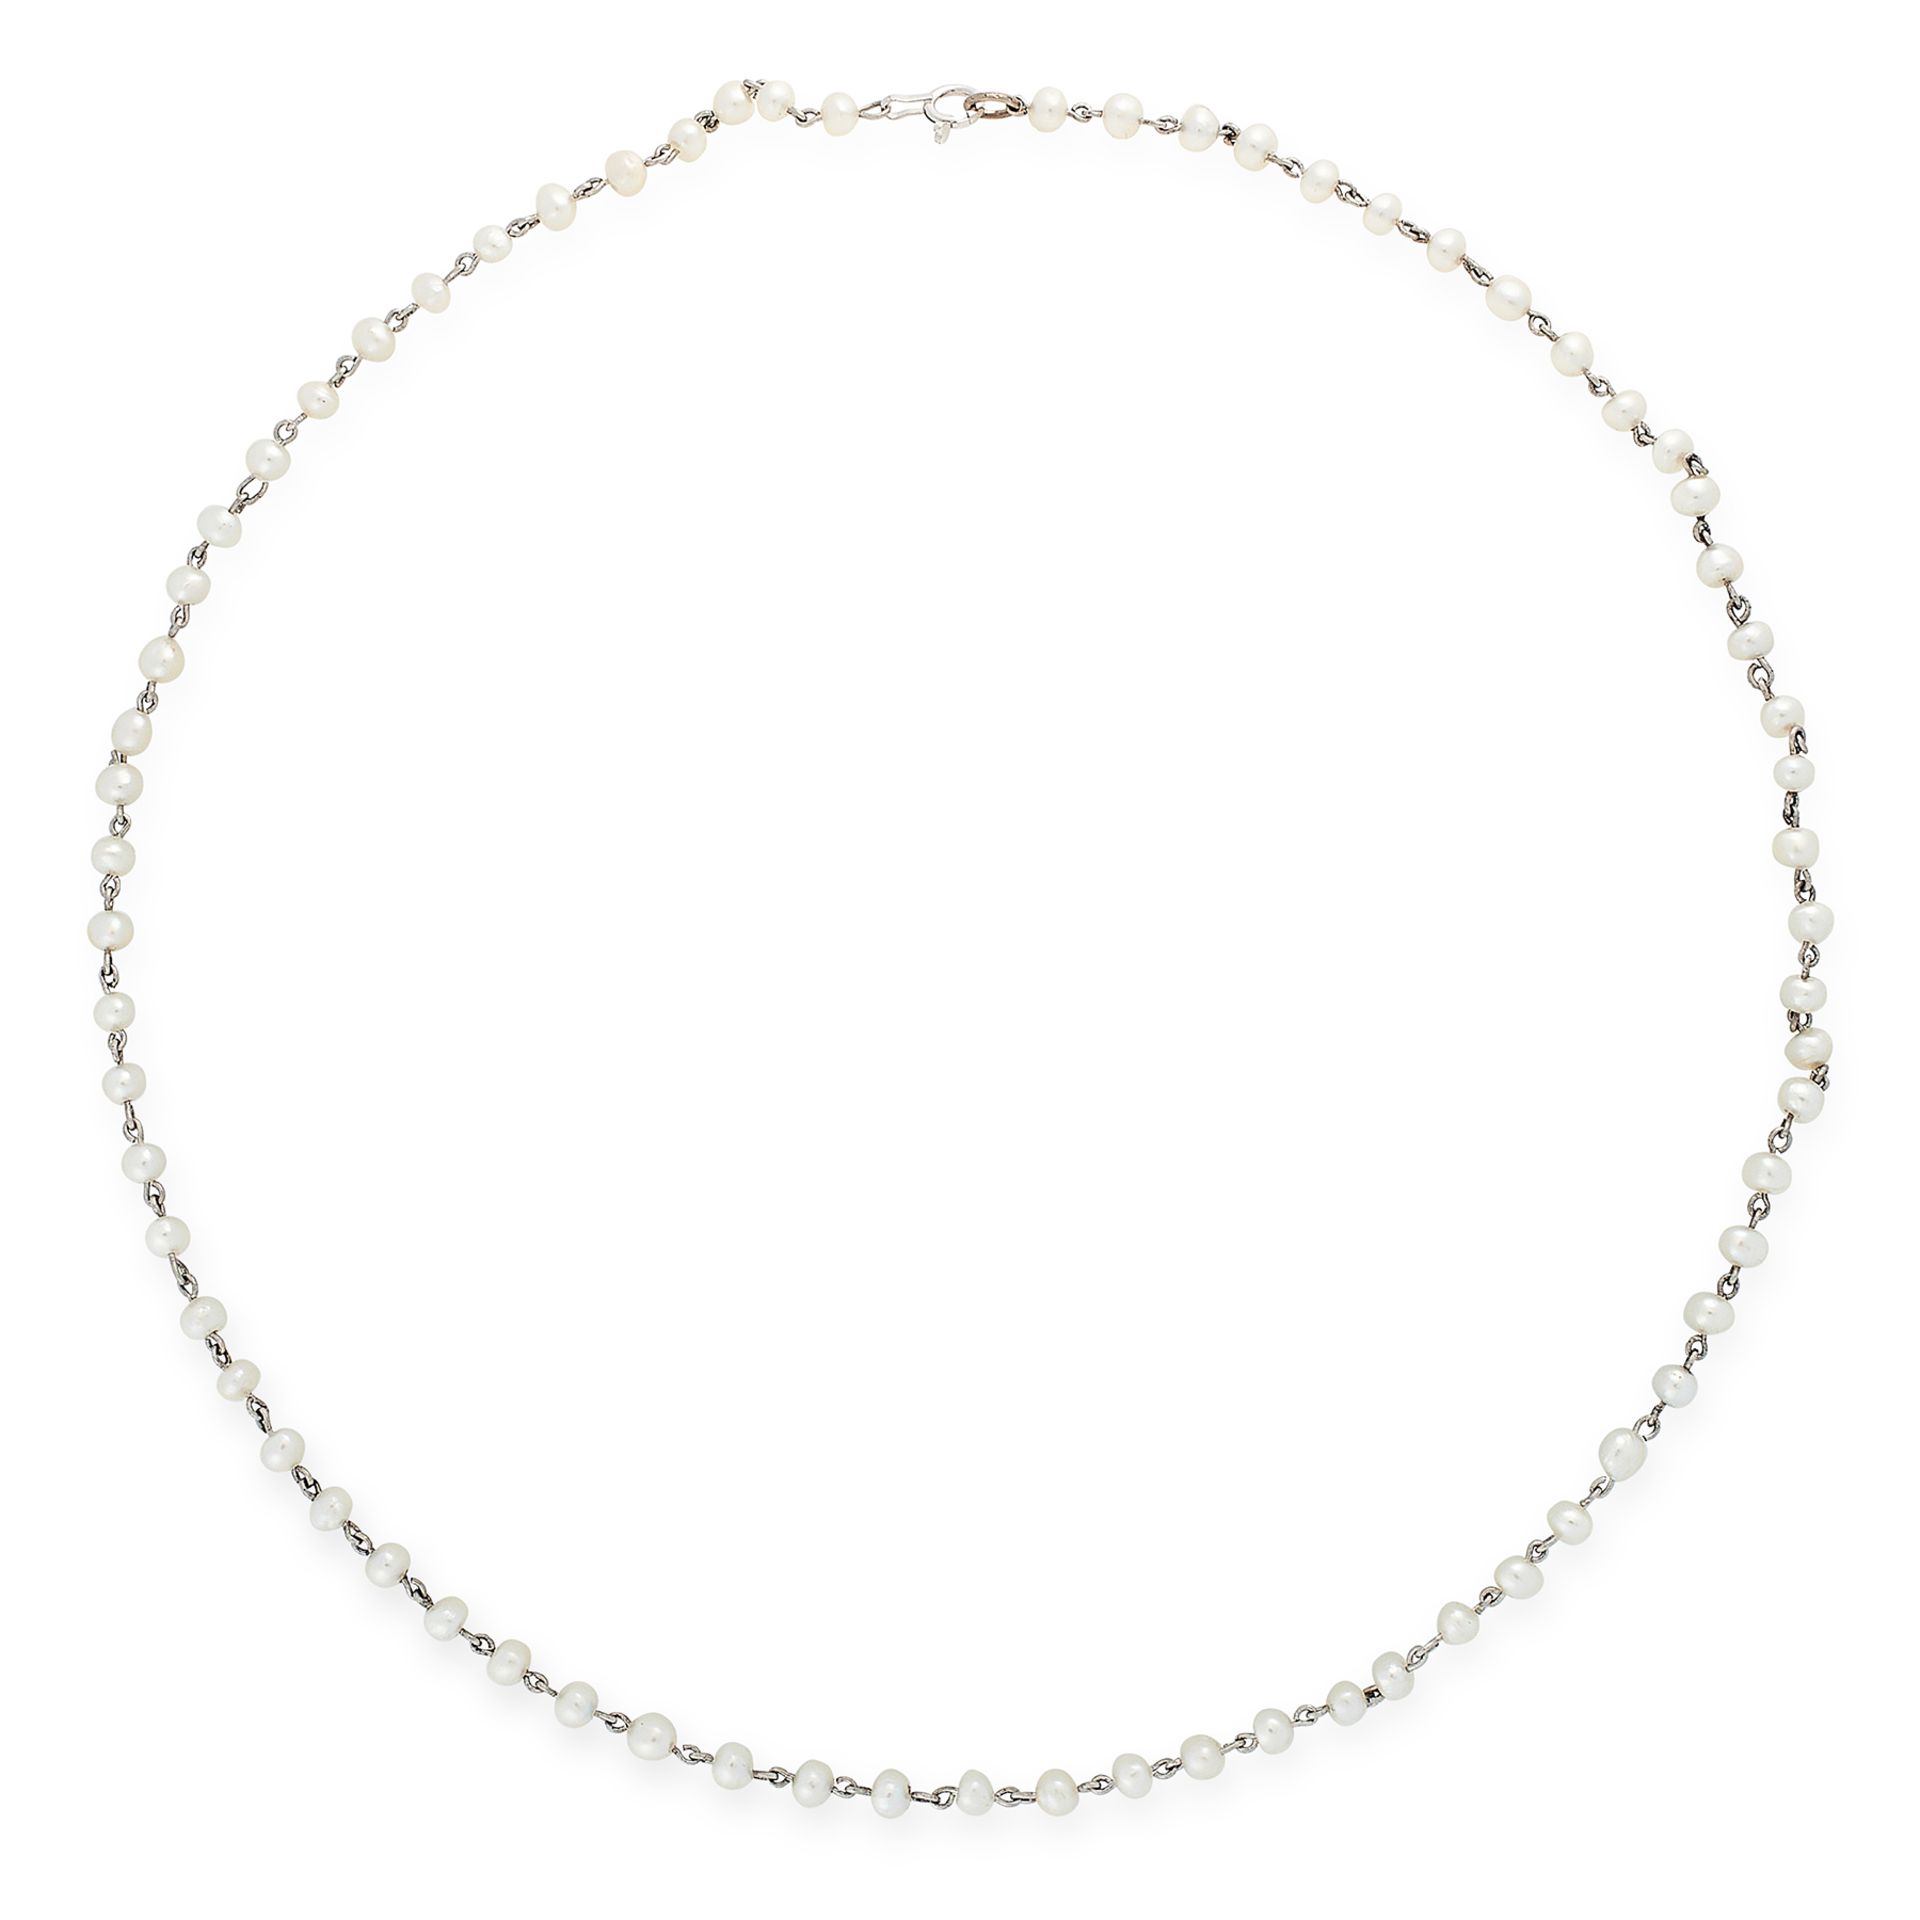 AN ART DECO PEARL CHAIN NECKLACE comprising a single row of seventy pearls connected by chain links,